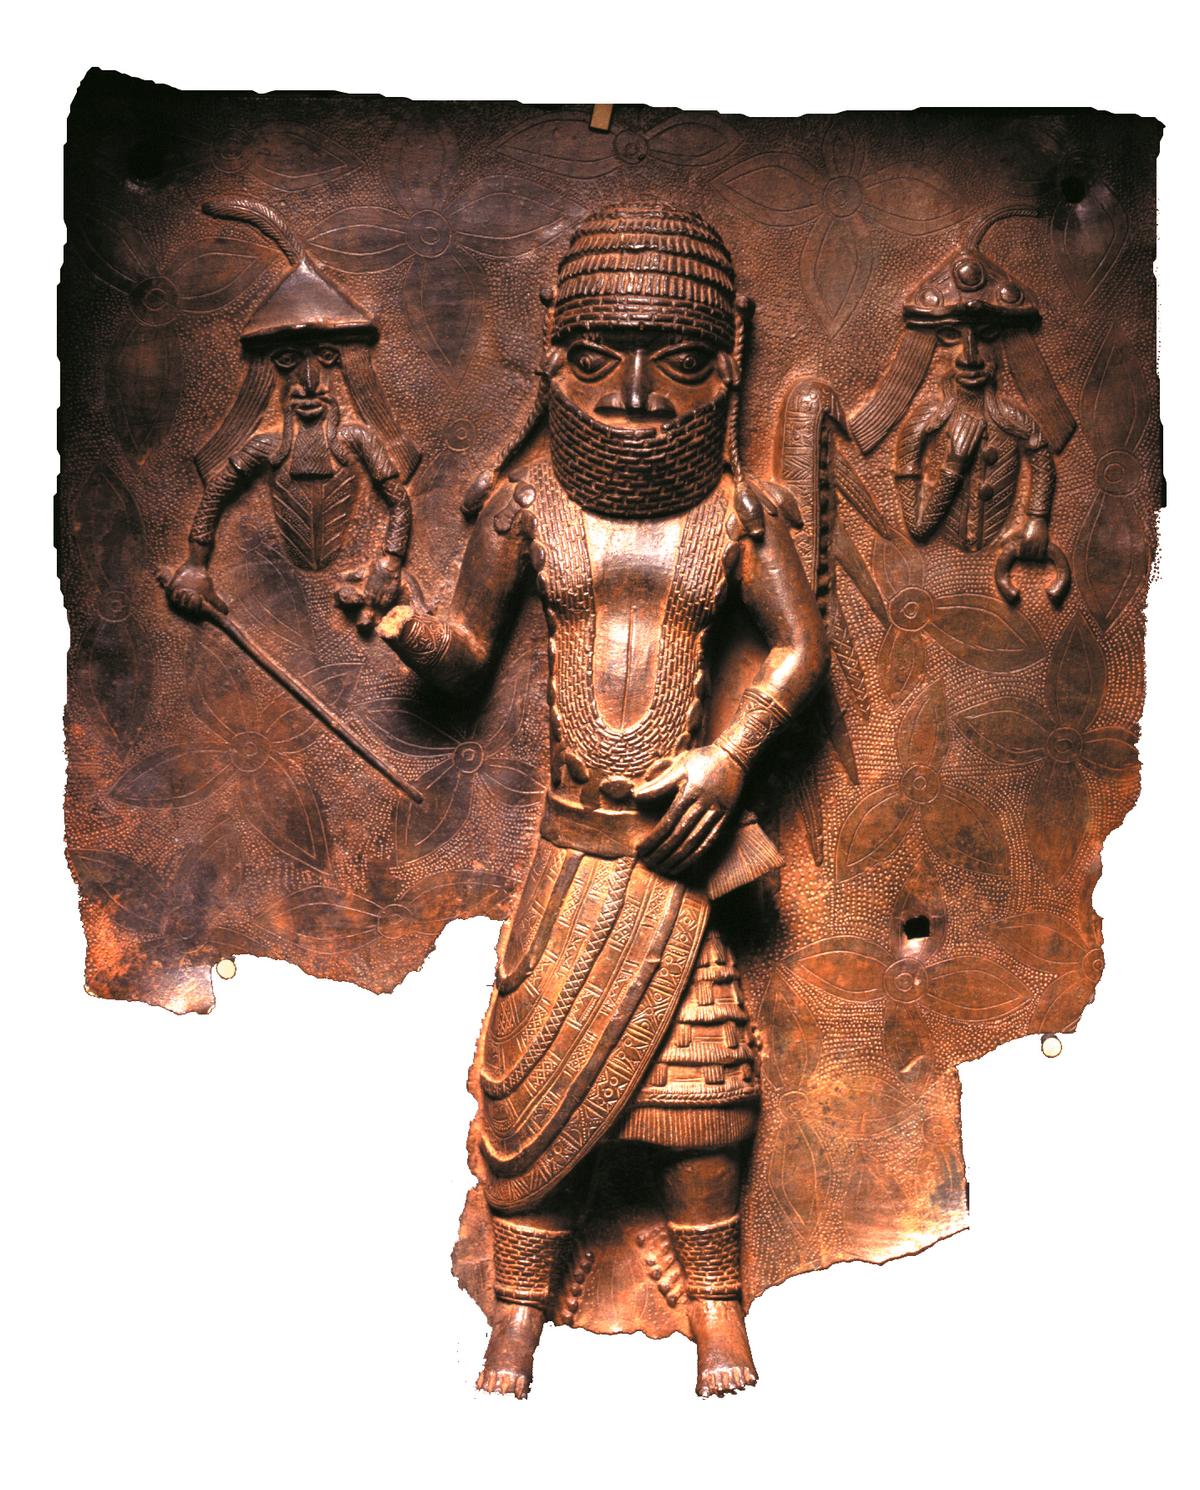 A Benin copper alloy plaque representing an encounter between Benin Chief Uwangue and Portuguese traders, who are depicted to his left and right. (Courtesy of Horniman Museum and Gardens via AP)